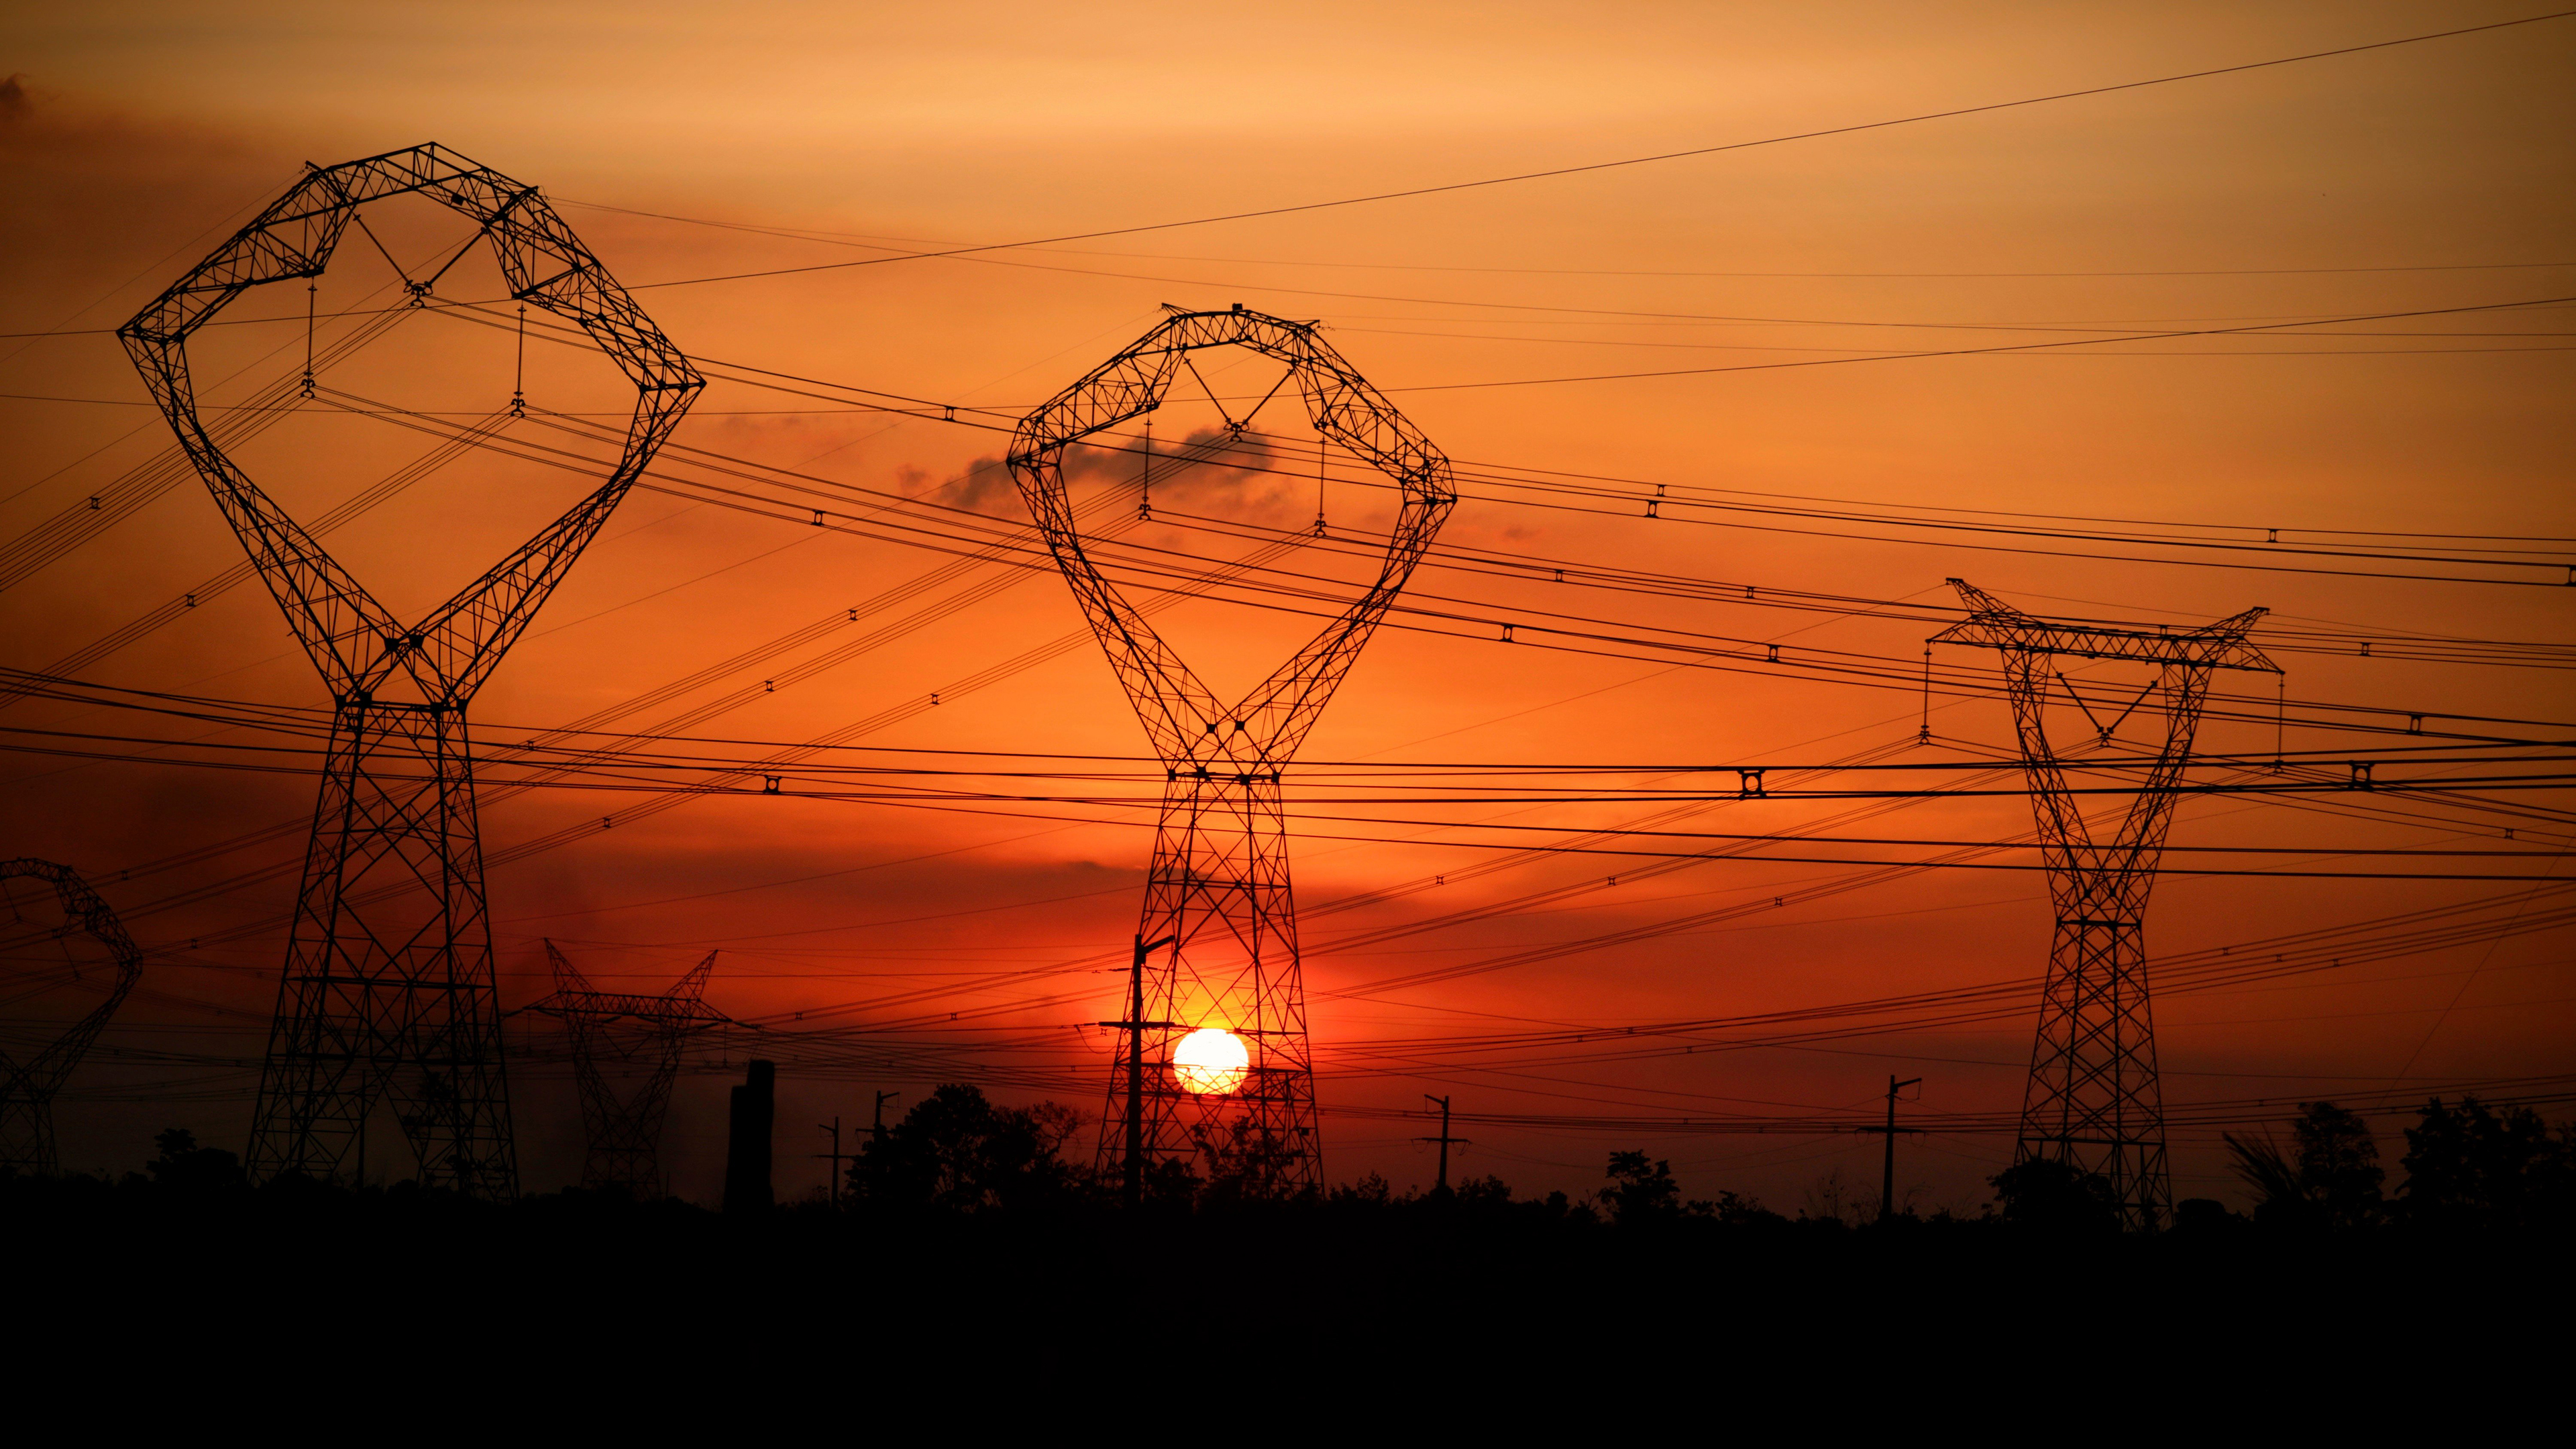 General 3840x2160 electricity tower sunset sky low light silhouette power lines pylon